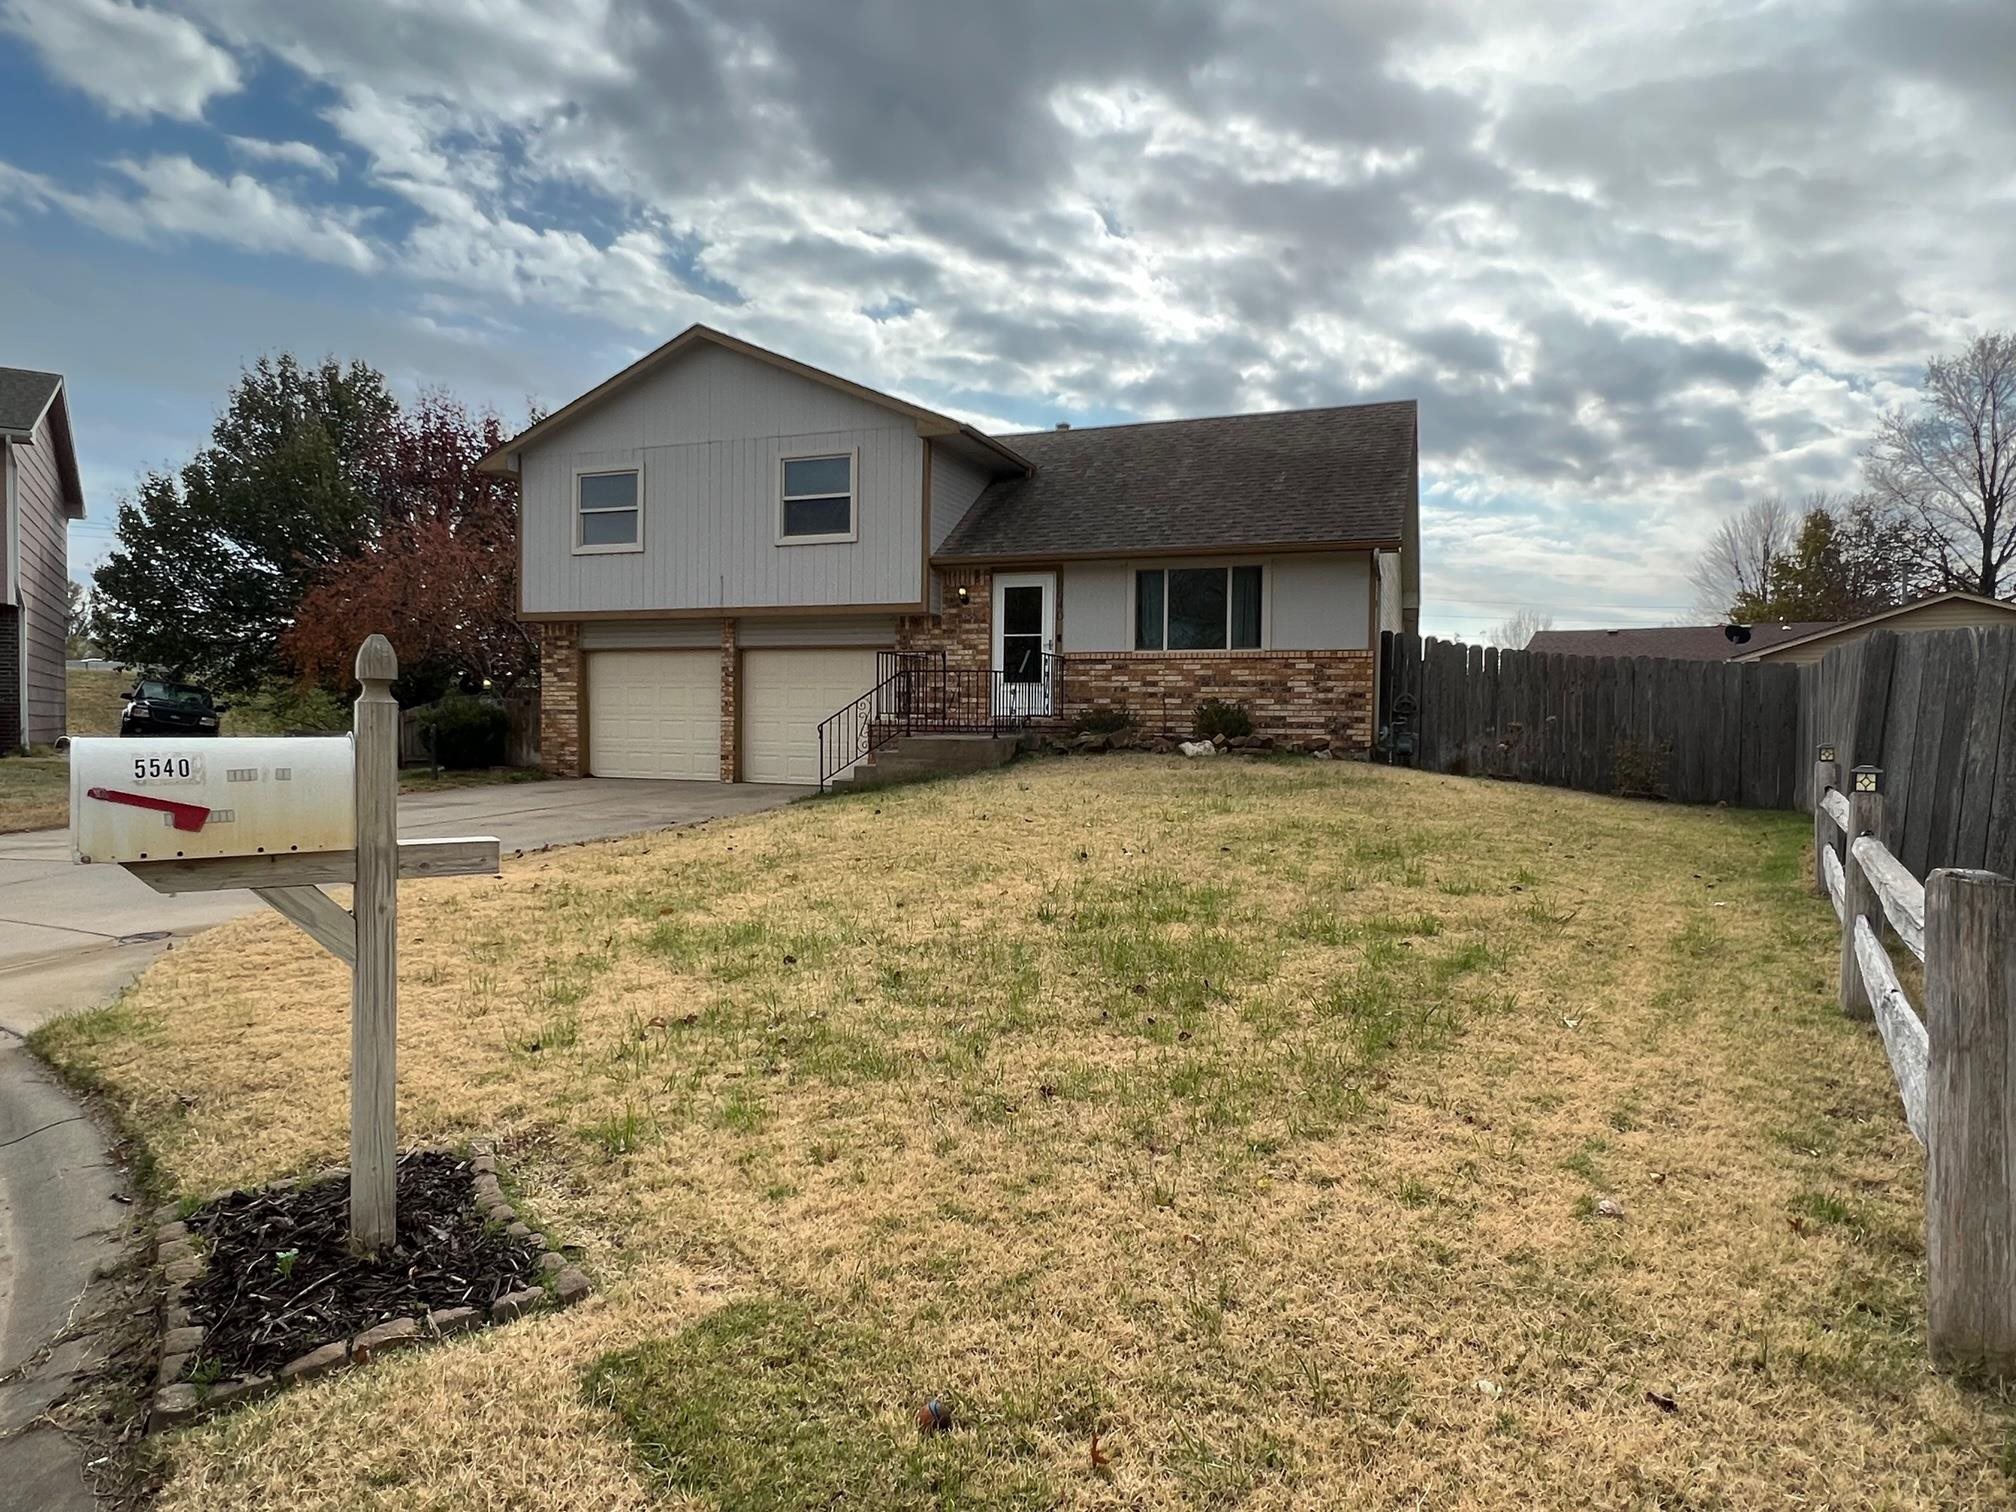 This 3 bedroom, 3 bathroom home is ready for a new family! Located in a quiet community on the south side of Wichita makes you feel like it's not quite in the city with all the conveniences of a city close by! As you pull up you will notice the property has been very well maintained and located at the end of a cul-de-sac. When you walk in you will be greeted by an open living/kitchen/dining area with a vaulted ceiling. The master bedroom complete with a bathroom is located upstairs along with the 2 other bedrooms and one bathroom. Downstairs you will find a large open room that can be used for recreation, a man cave or anything else you choose! There is also a large bathroom and storage downstairs as well. The backyard is spacious and boasts a covered deck to enjoy during down time. Don't miss out on the property! Contact showing agent for your private showing today!